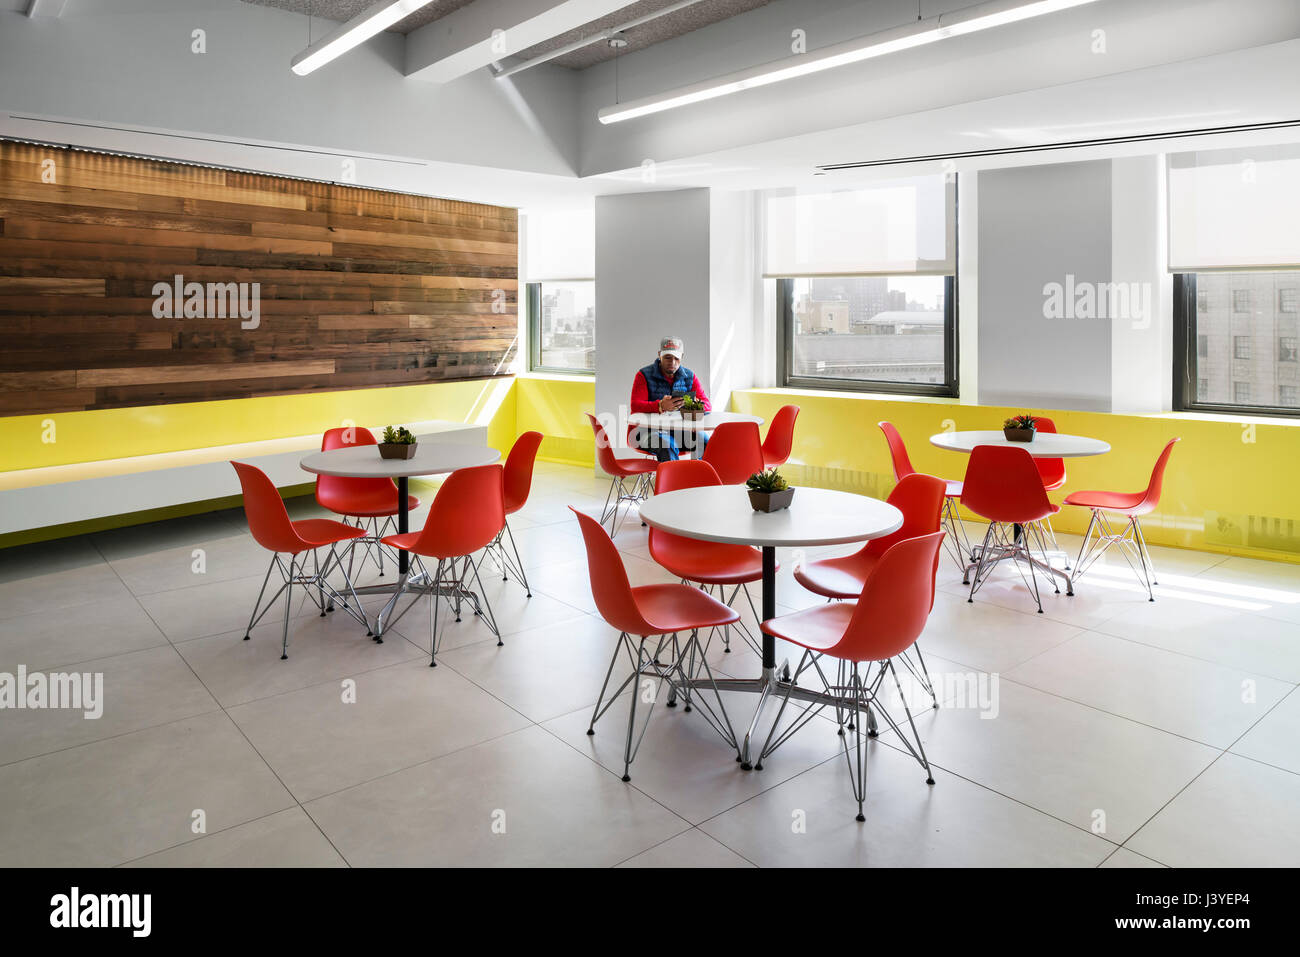 Interior view of the canteen. 2 Lafayette Street  NYC Department of Youth, New York, United States. Architect: BKSK Architects, 2015. Stock Photo